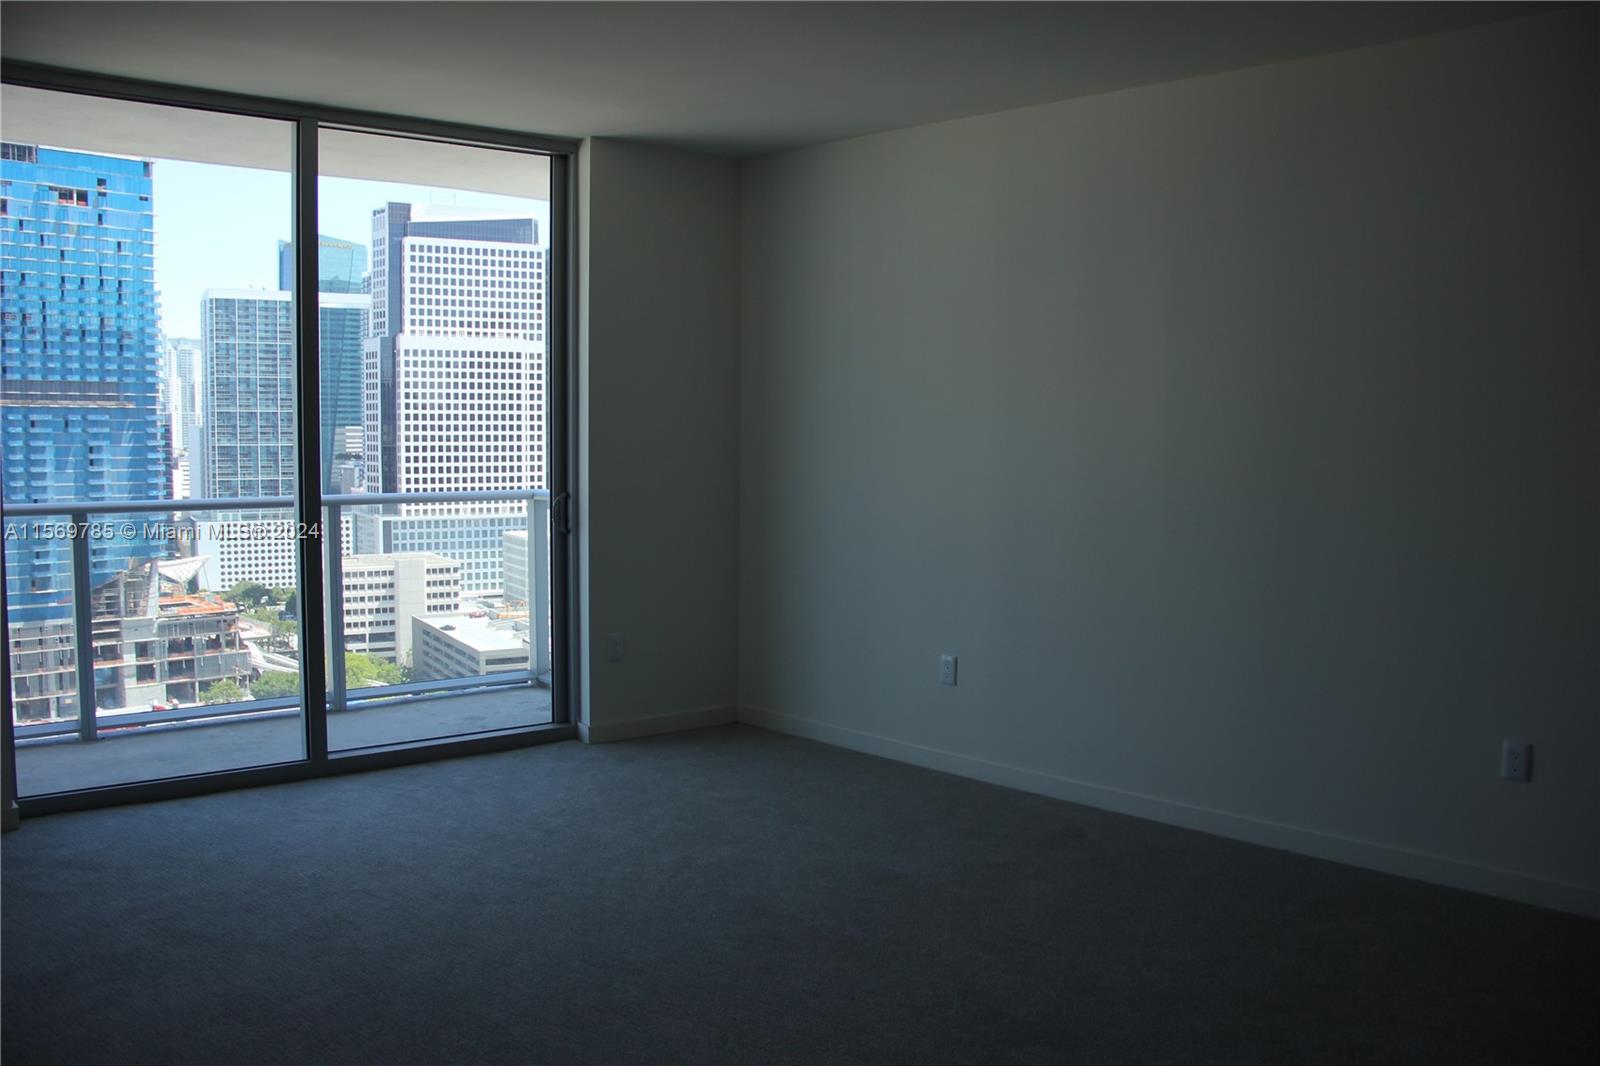 Live at Millecento Condo. 1 Bedroom/ 1 bathroom spacious unit. The unit will have wood laminated floors. Condo offers great amenities. Walking distance to Mary Brickell Village, Brickell City Centre, metro mover, restaurants, night life, and much more